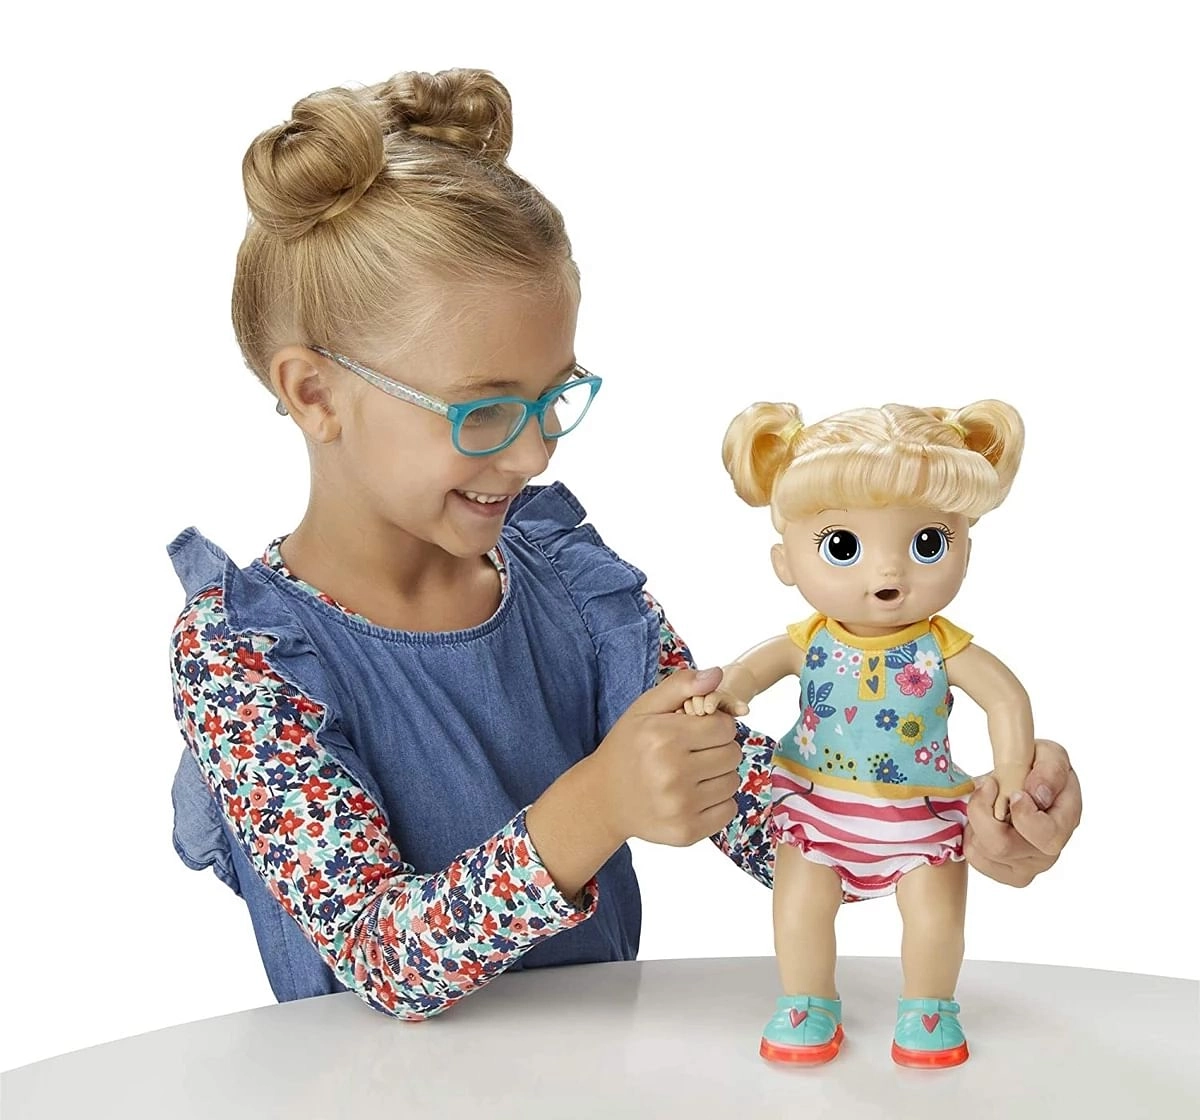 Baby Alive Step and Giggle Baby Blonde Hair Doll with Light up Shoes, Responds with 25+ Sounds and Phrases Toy for Kids 3Y+, Multicolour